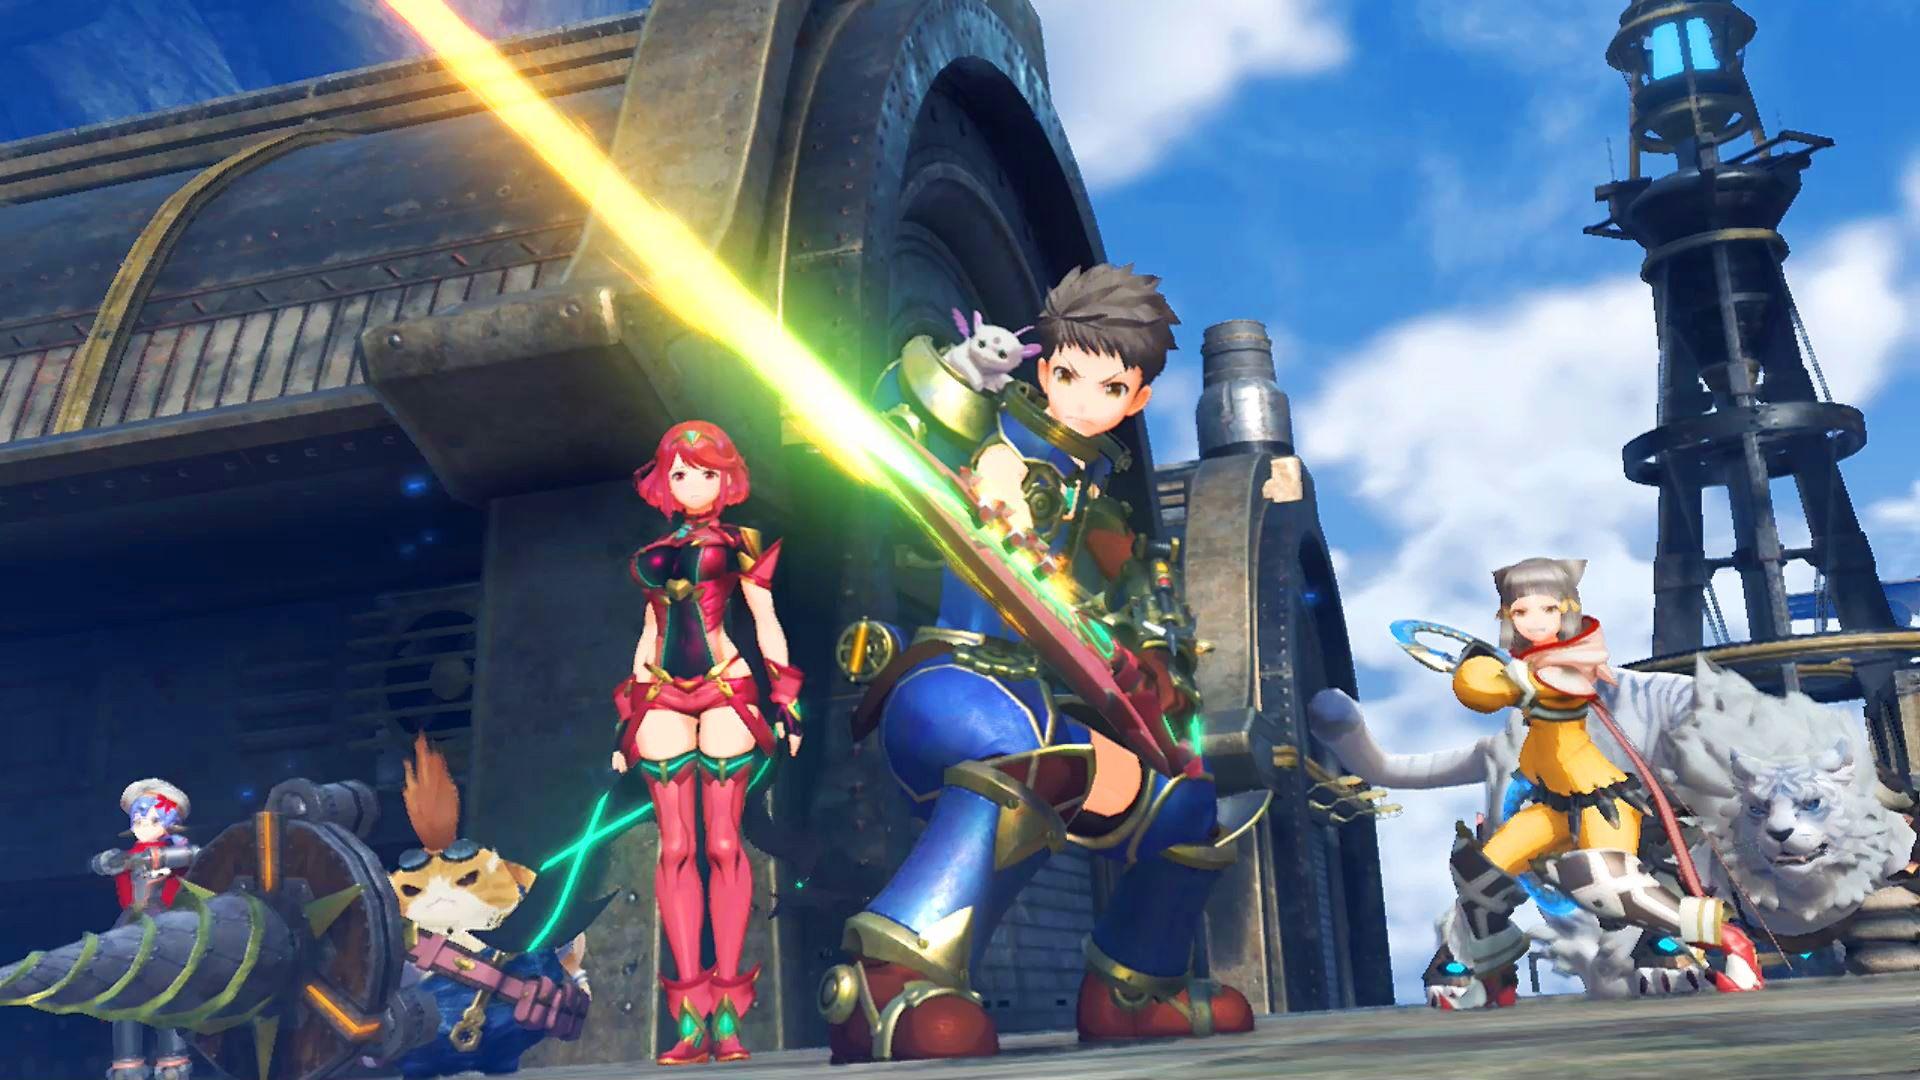 xenoblade chronicles torna download